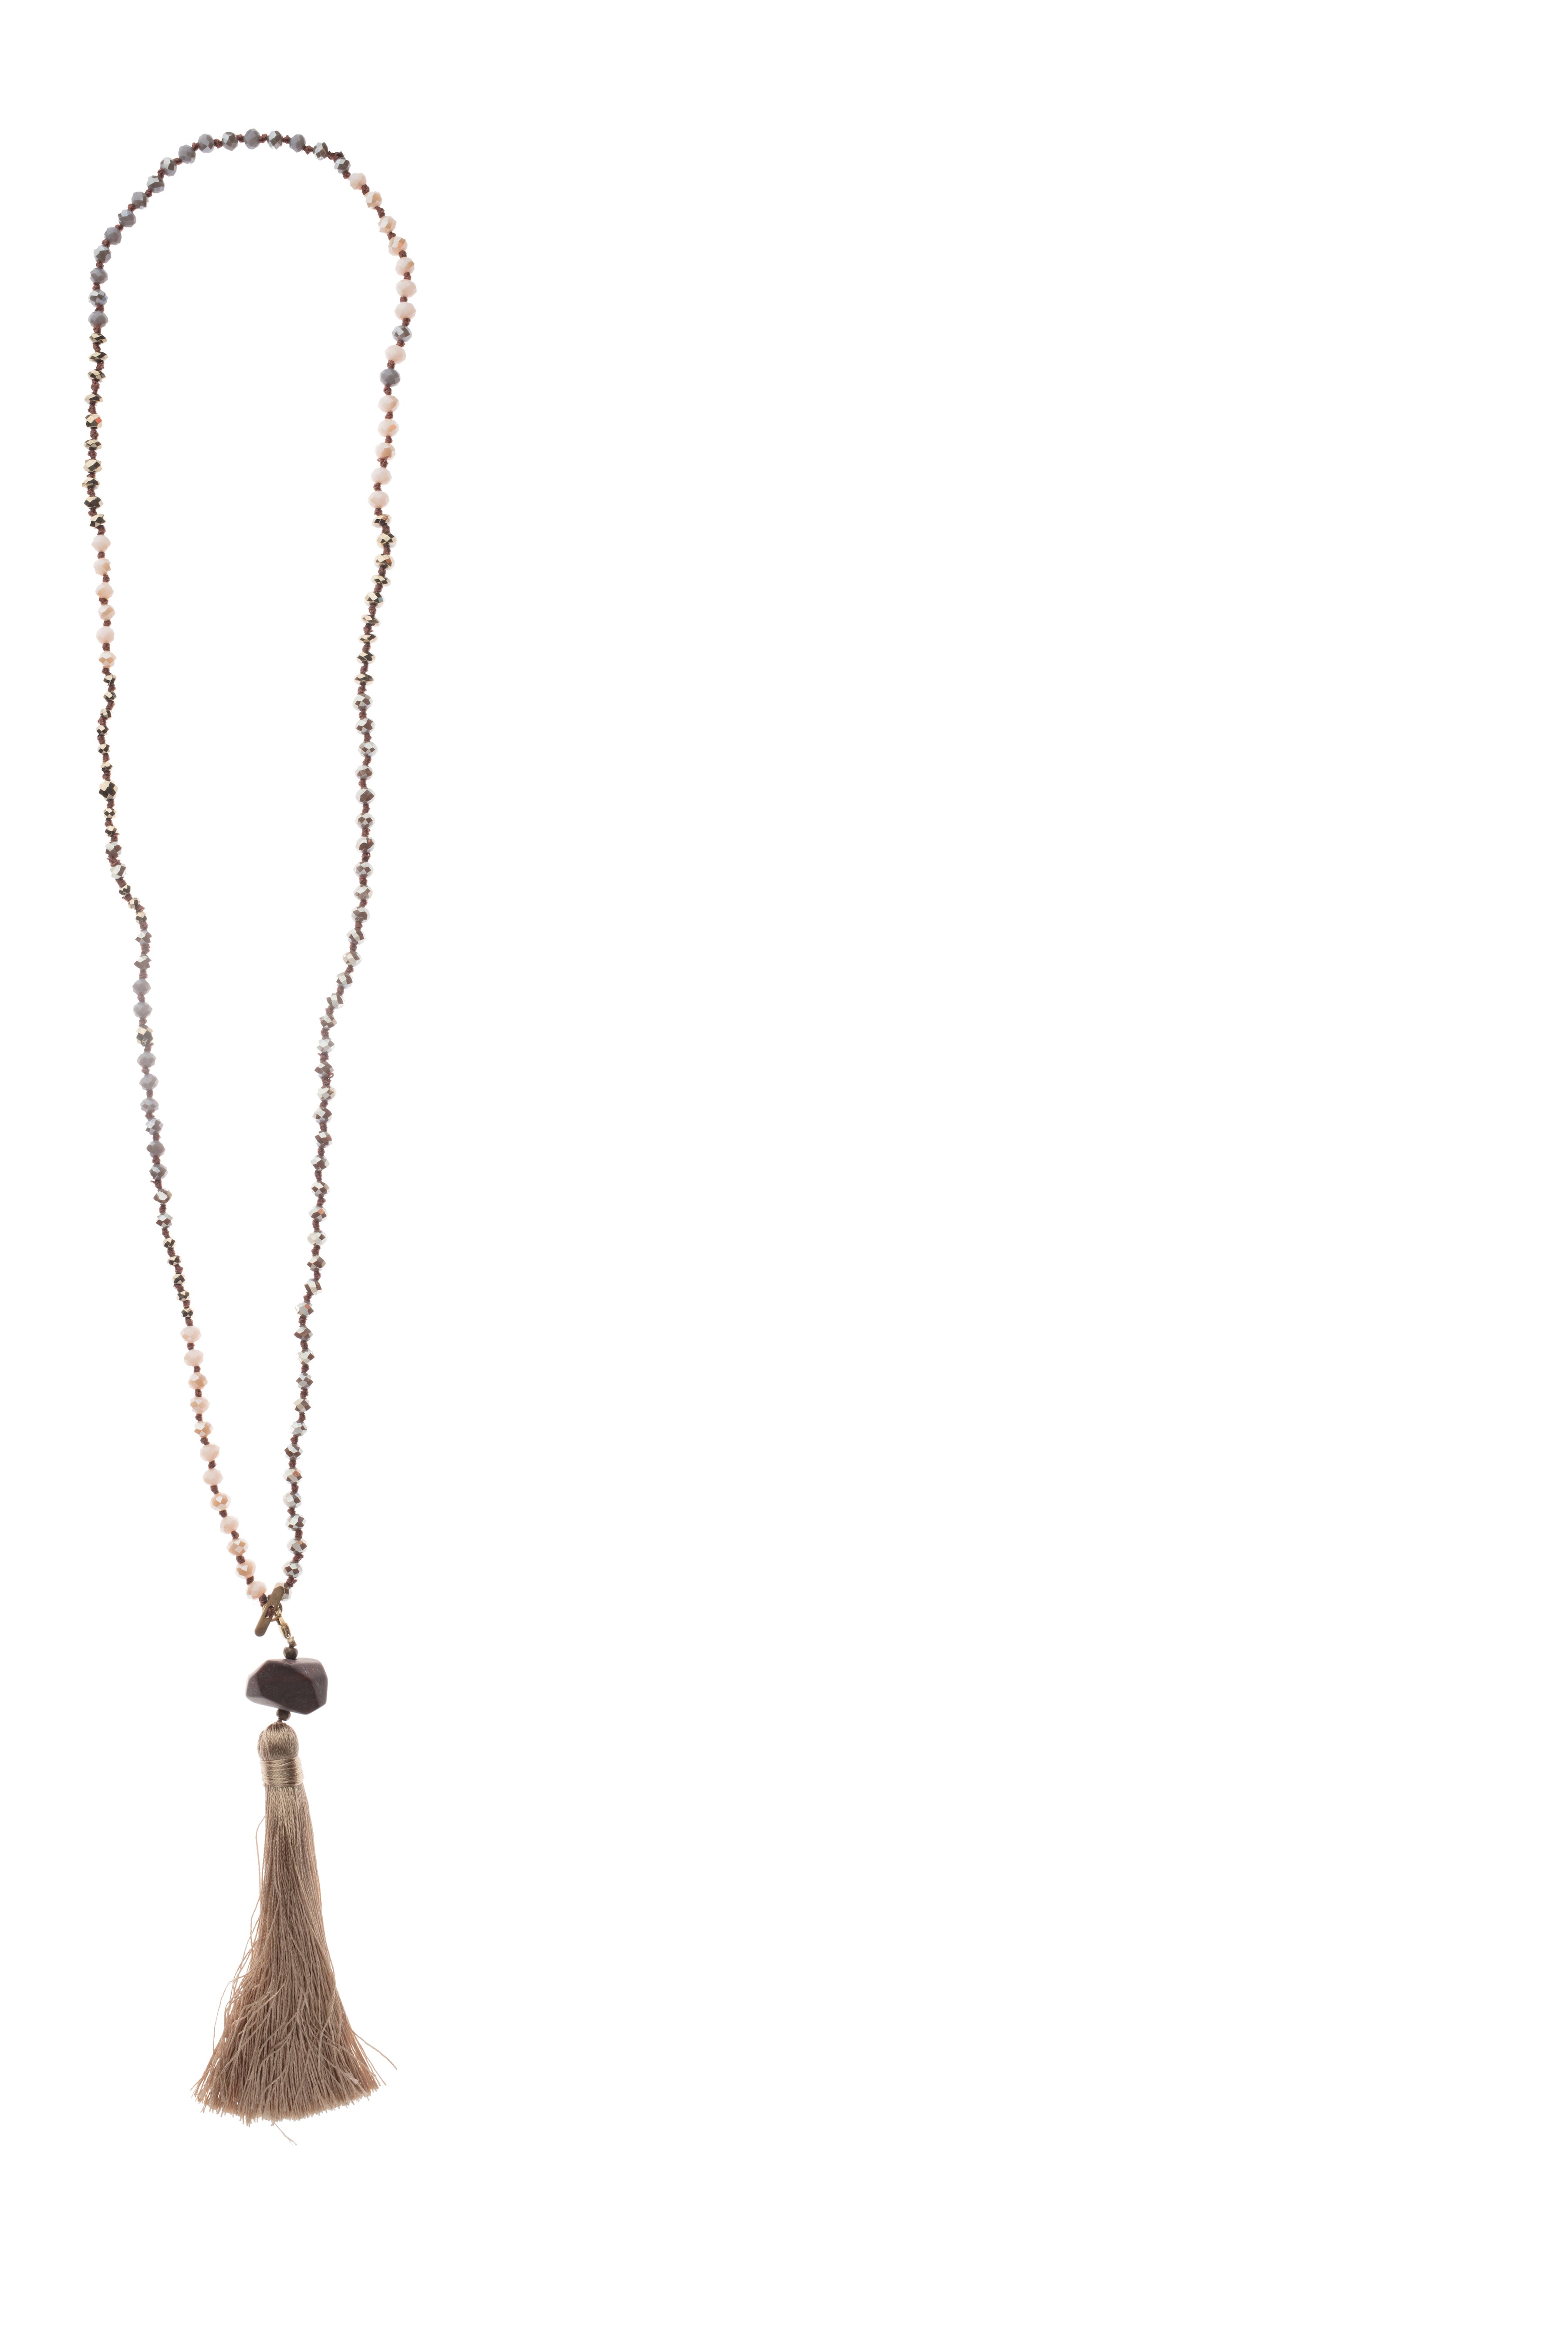 Hand-Knotted Crystal Necklace with Stone + Tassel